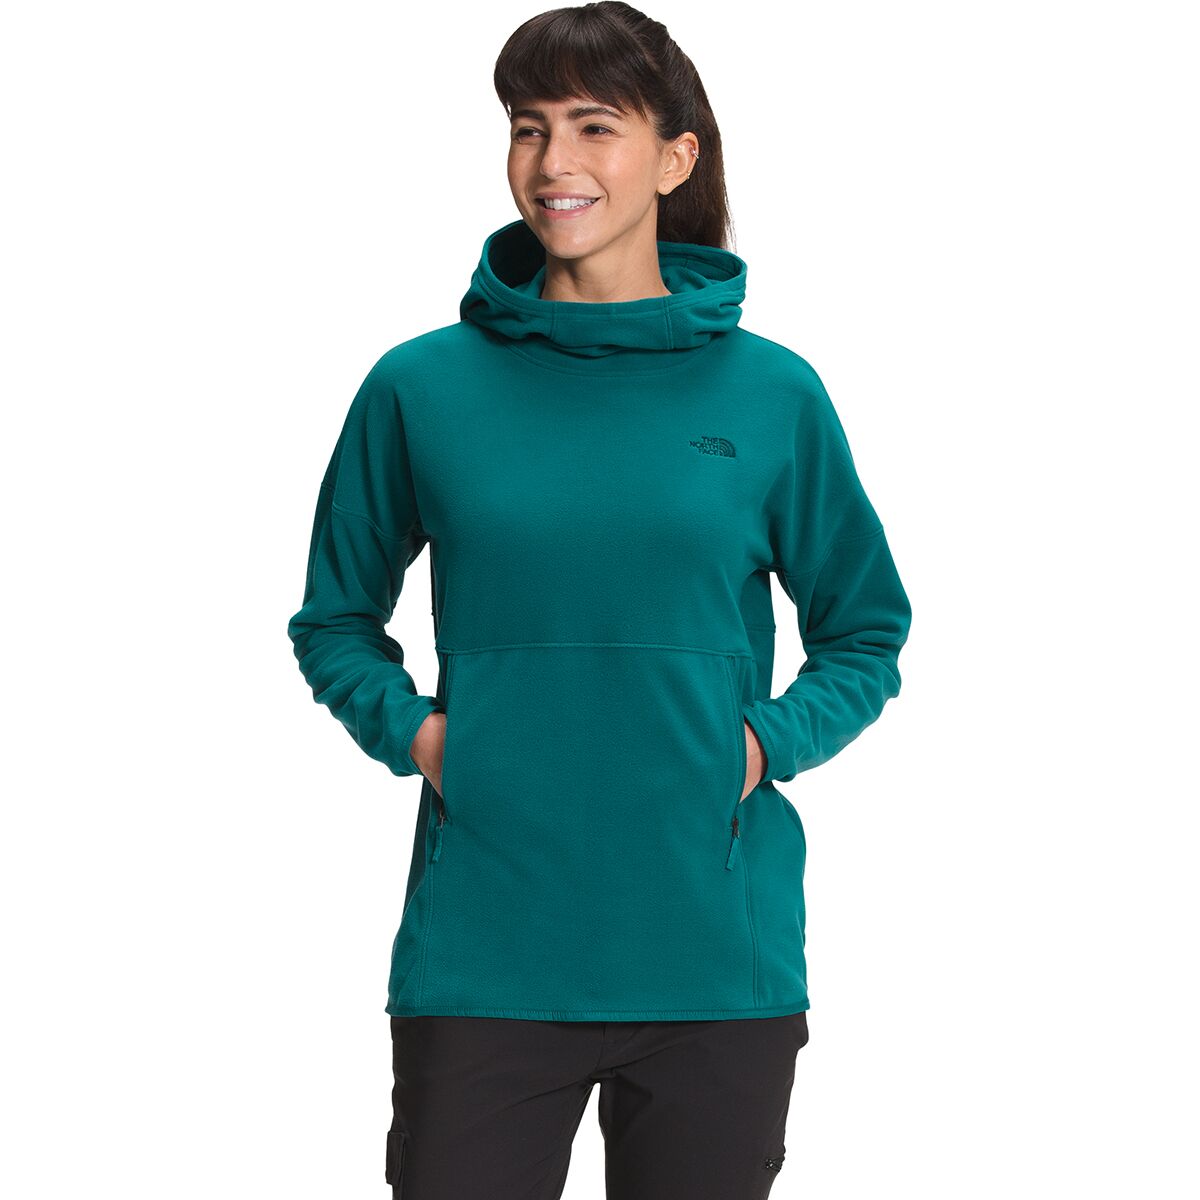 The North Face TKA Glacier Pullover Hoodie - Women's